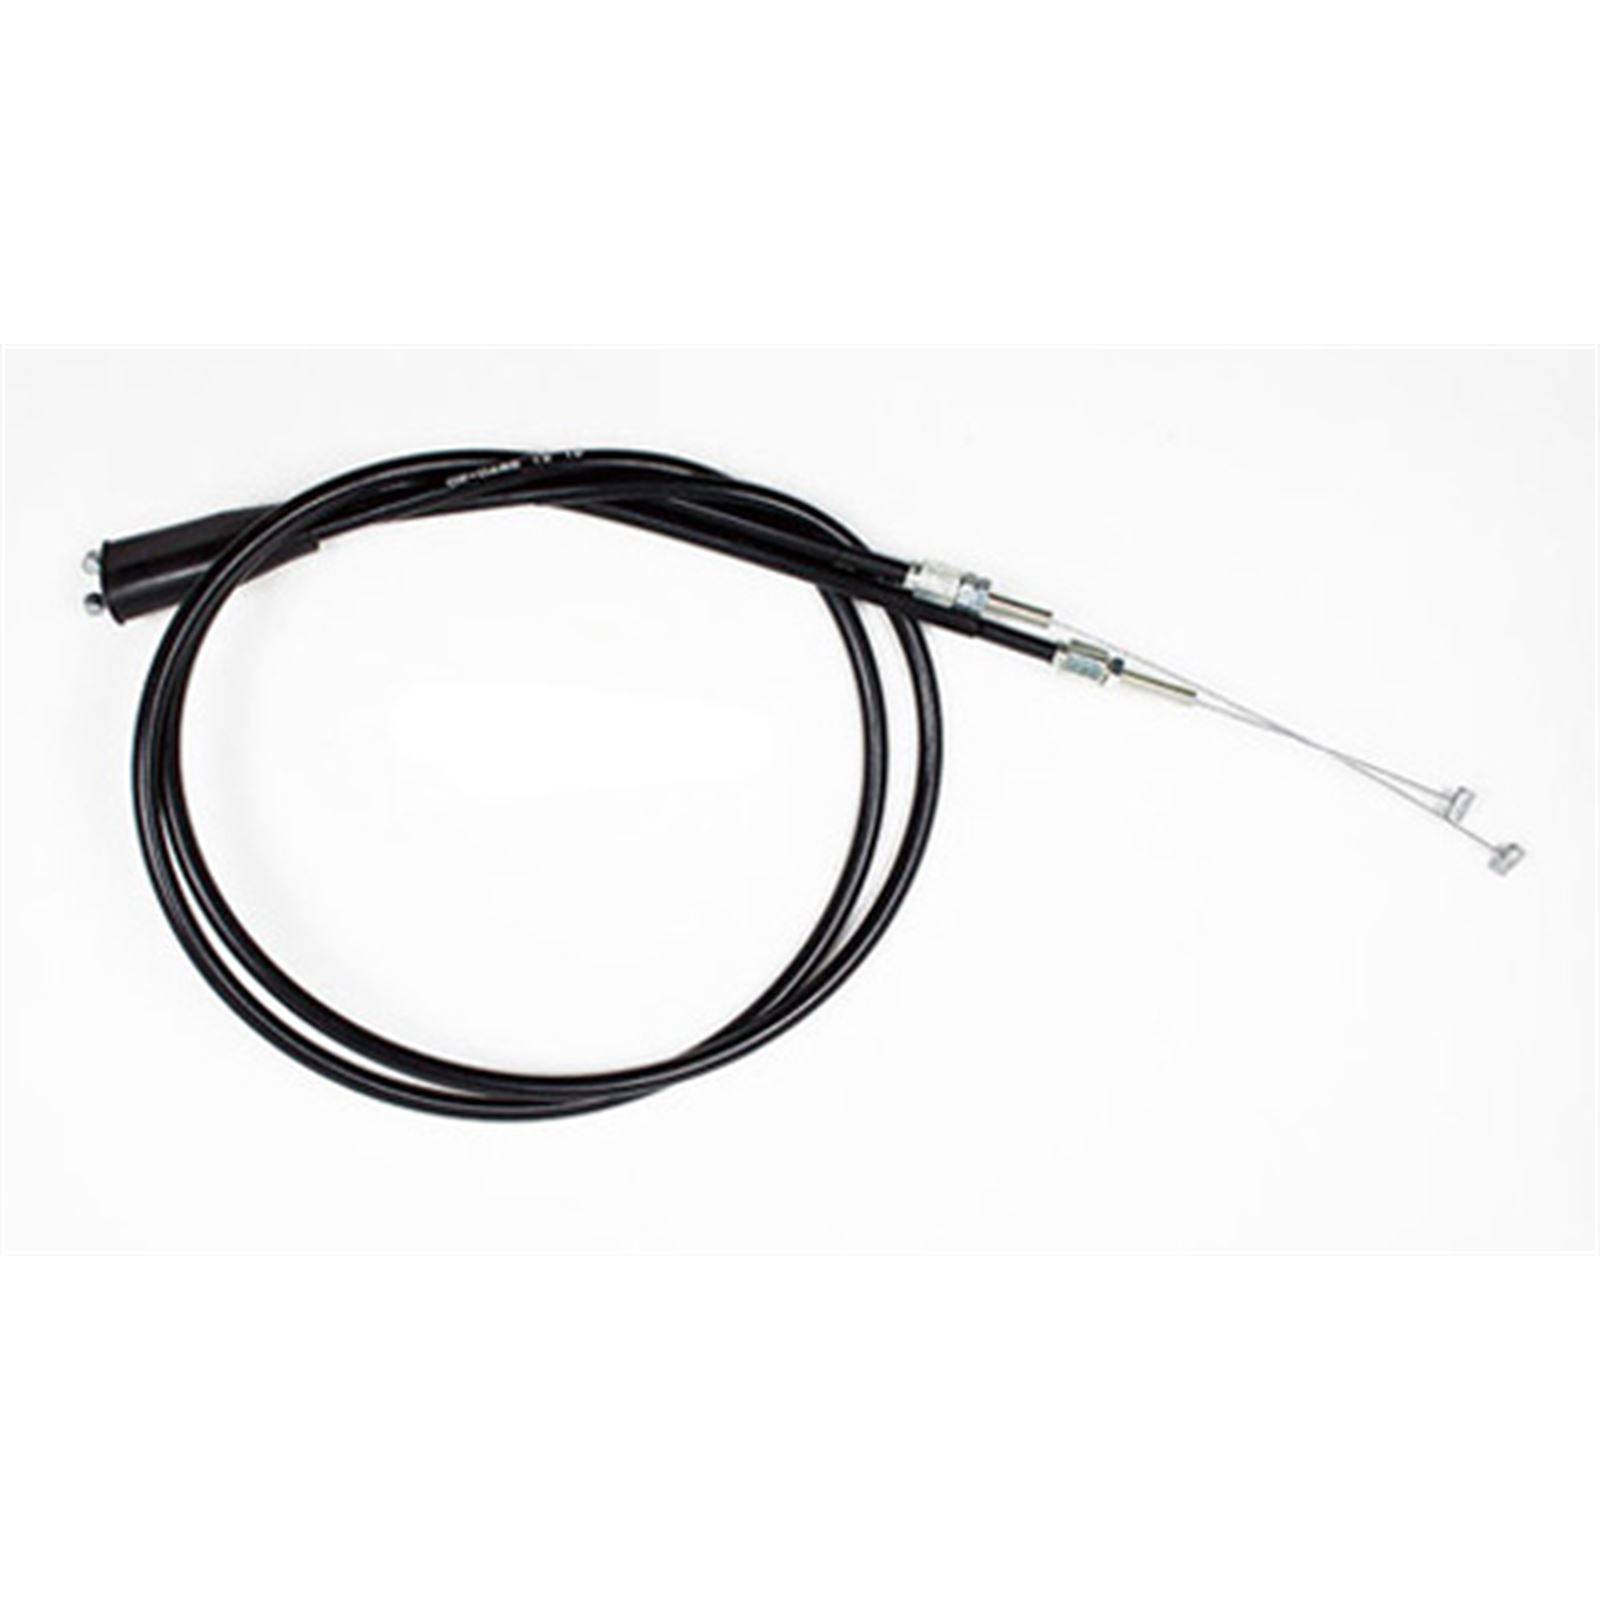 Motion Pro Motocross/Off-Road Throttle Cable